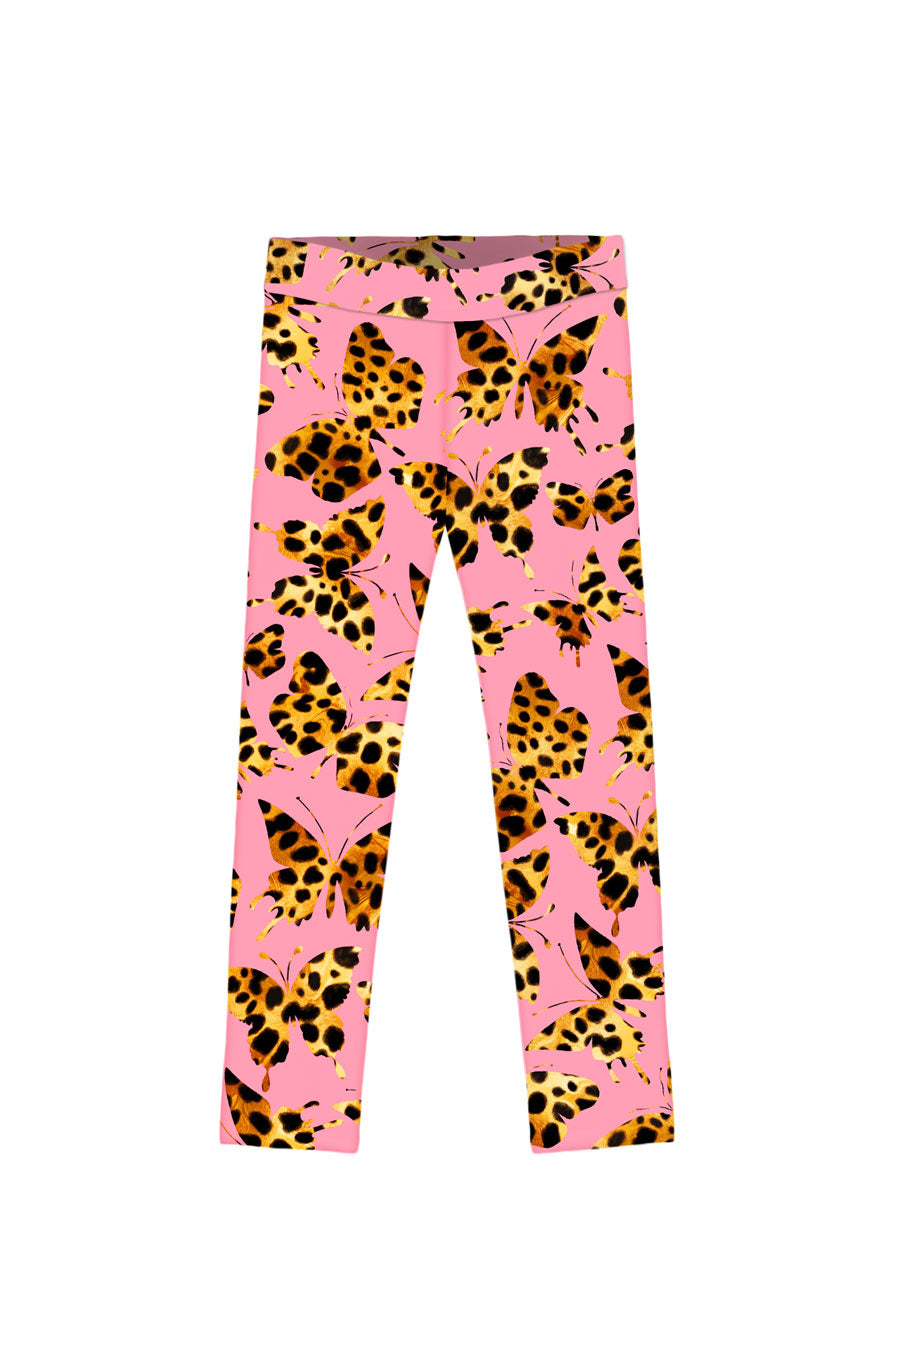 Quaintrelle Lucy Pink Butterfly Print School Active Leggings - Girls - Pineapple Clothing